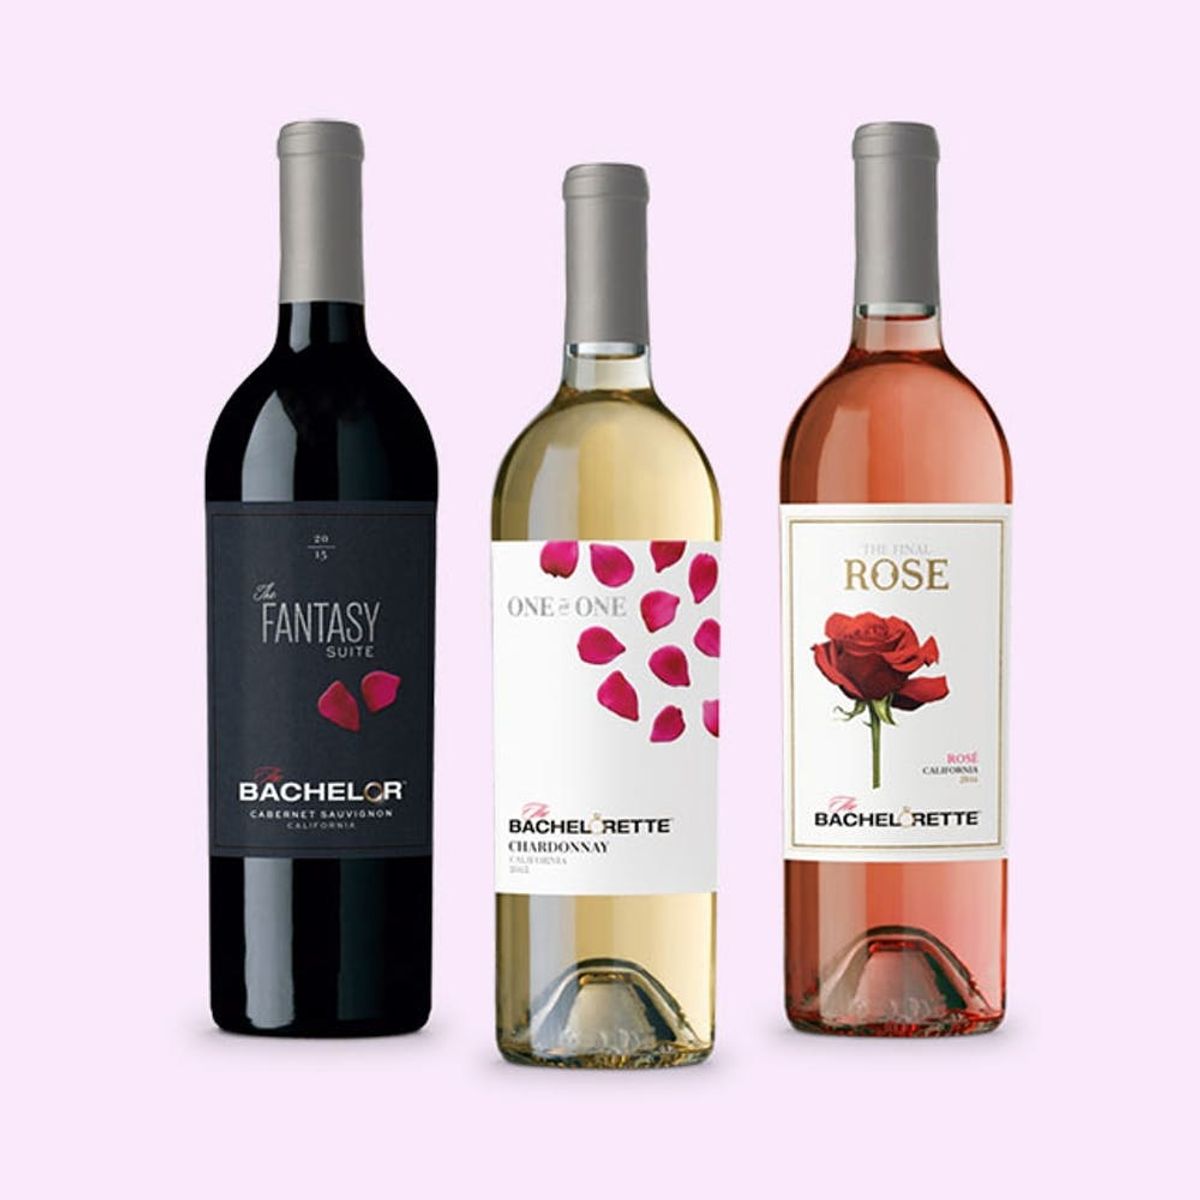 Bachelor-Themed Wines Are Here to Hold You Over Until the New Season Starts